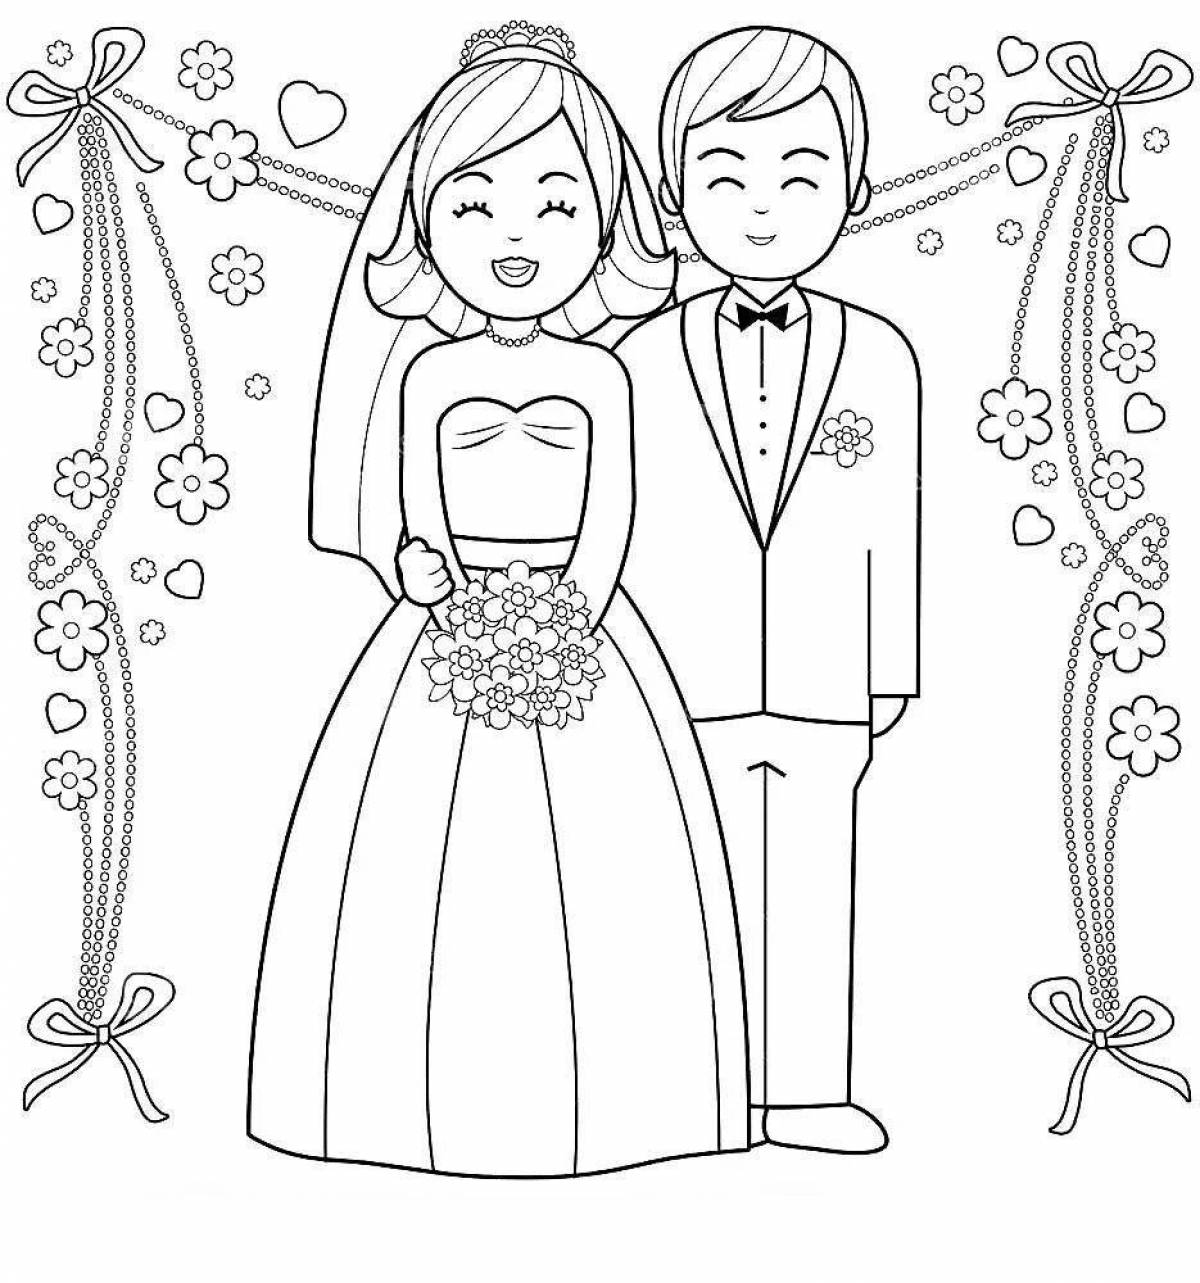 Coloring page charming bride and groom